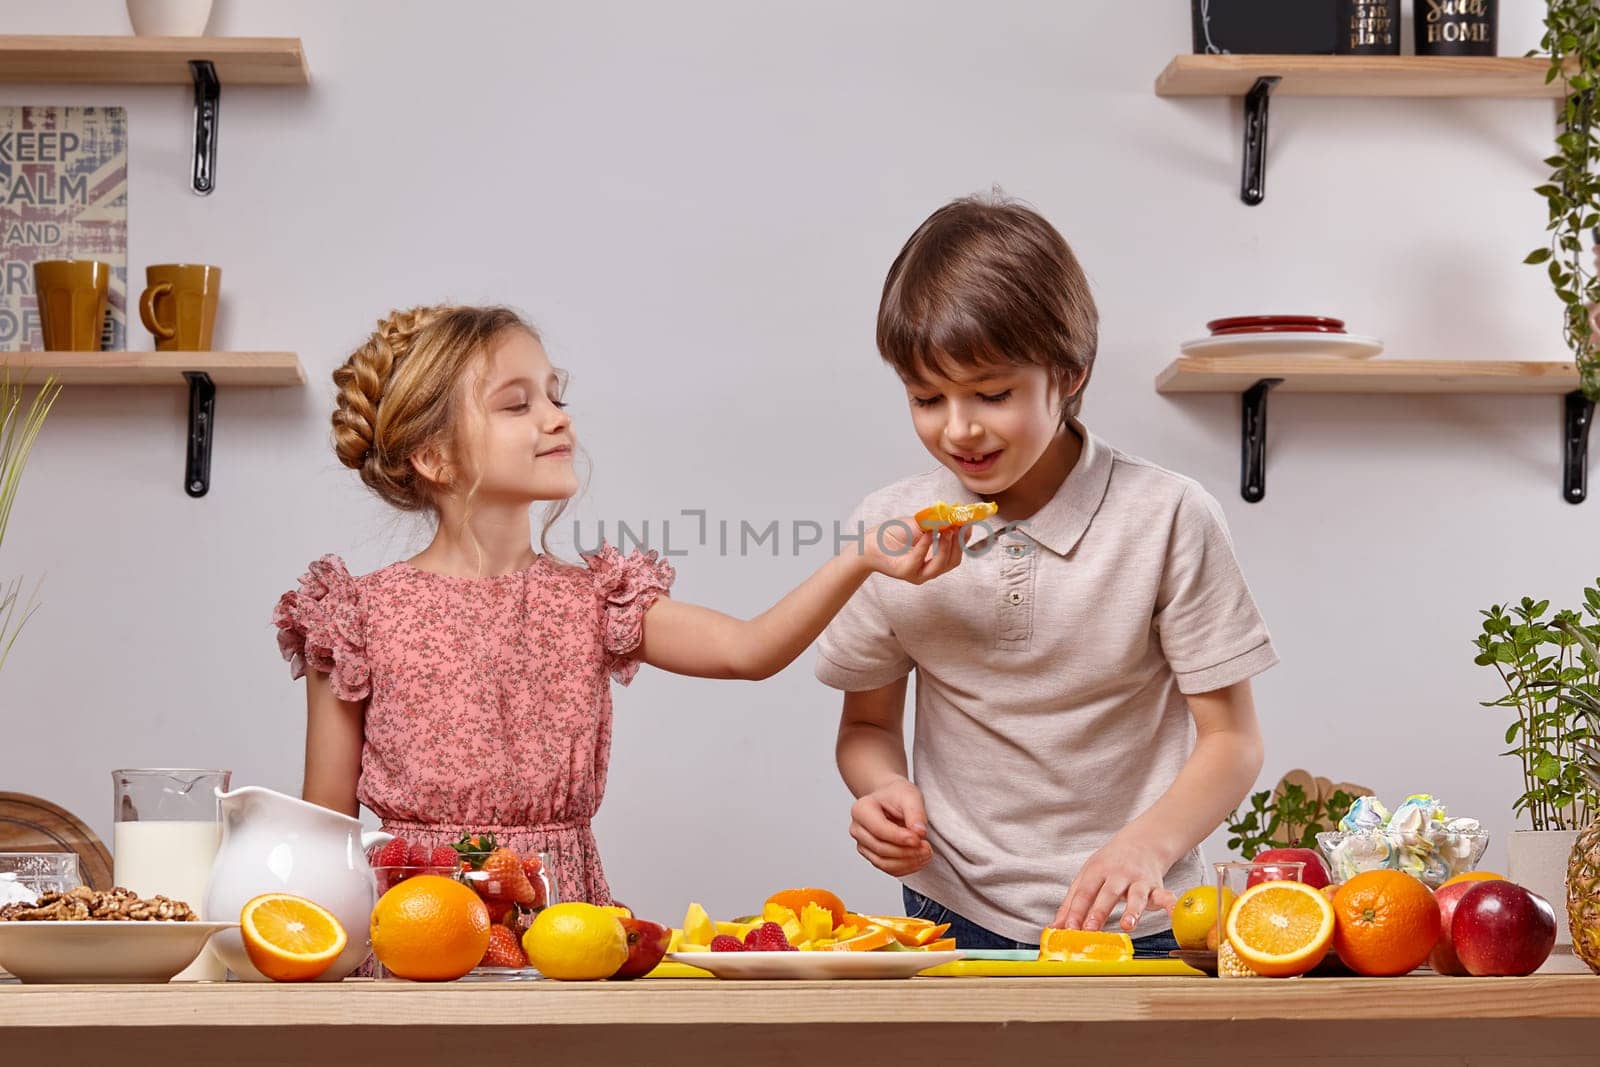 Cute cook couple. Nice boy with brown hair dressed in a light t-shirt and jeans with a cheerful little girl dressed in a pink dress with a braid in her hairstyle are at a kitchen against a white wall with shelves on it. Girl is treating a boy with some orange.